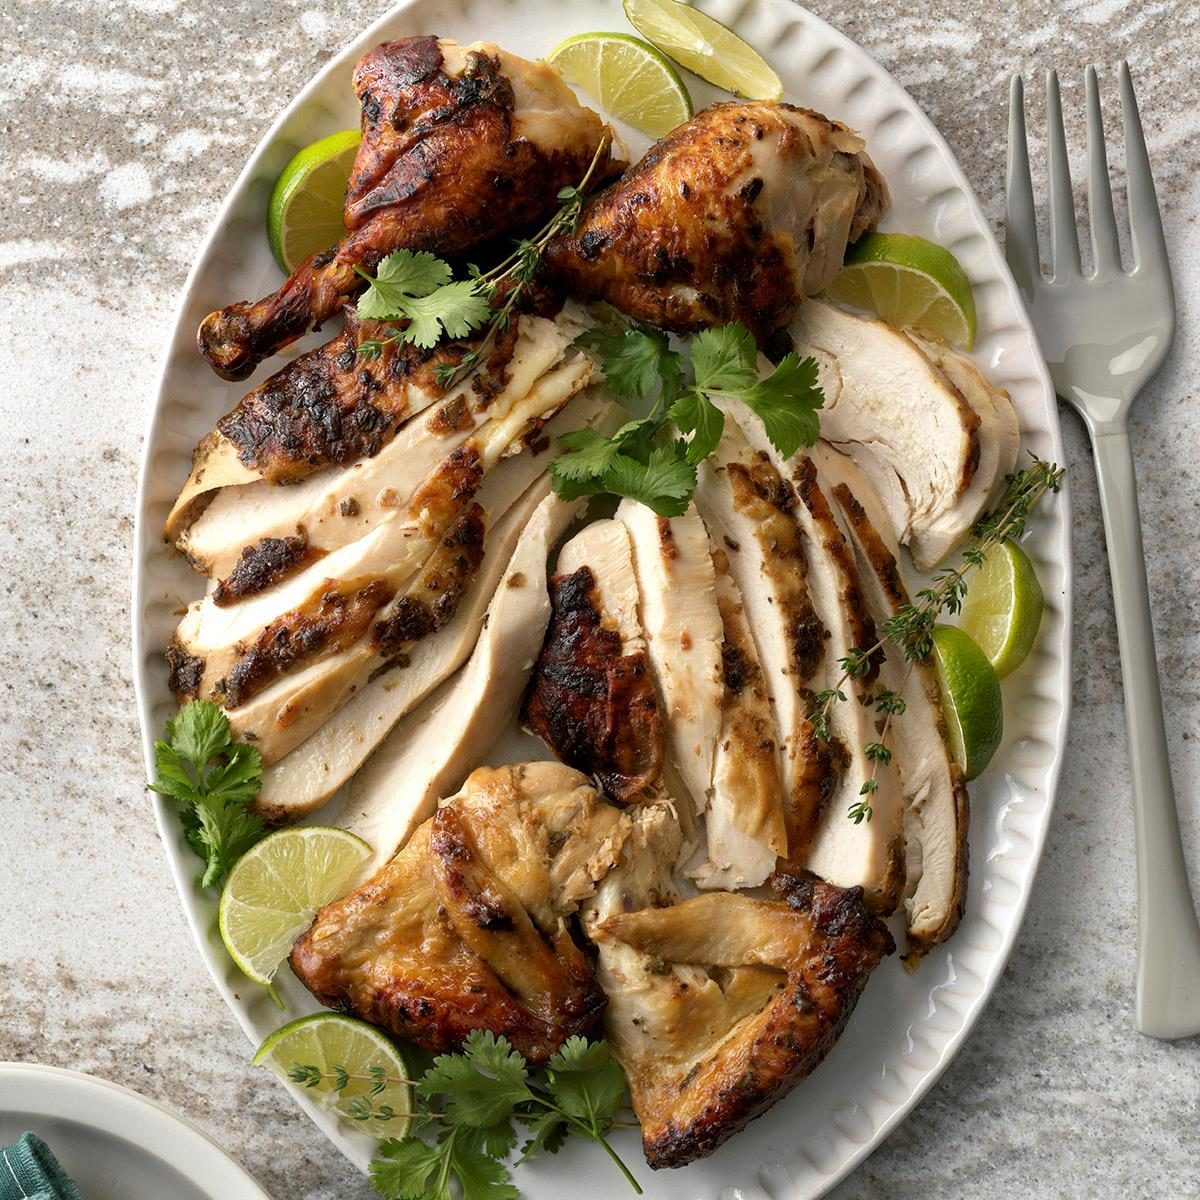 Roasted Lime Chicken Exps Chbz19 50922 C10 24 14b 5